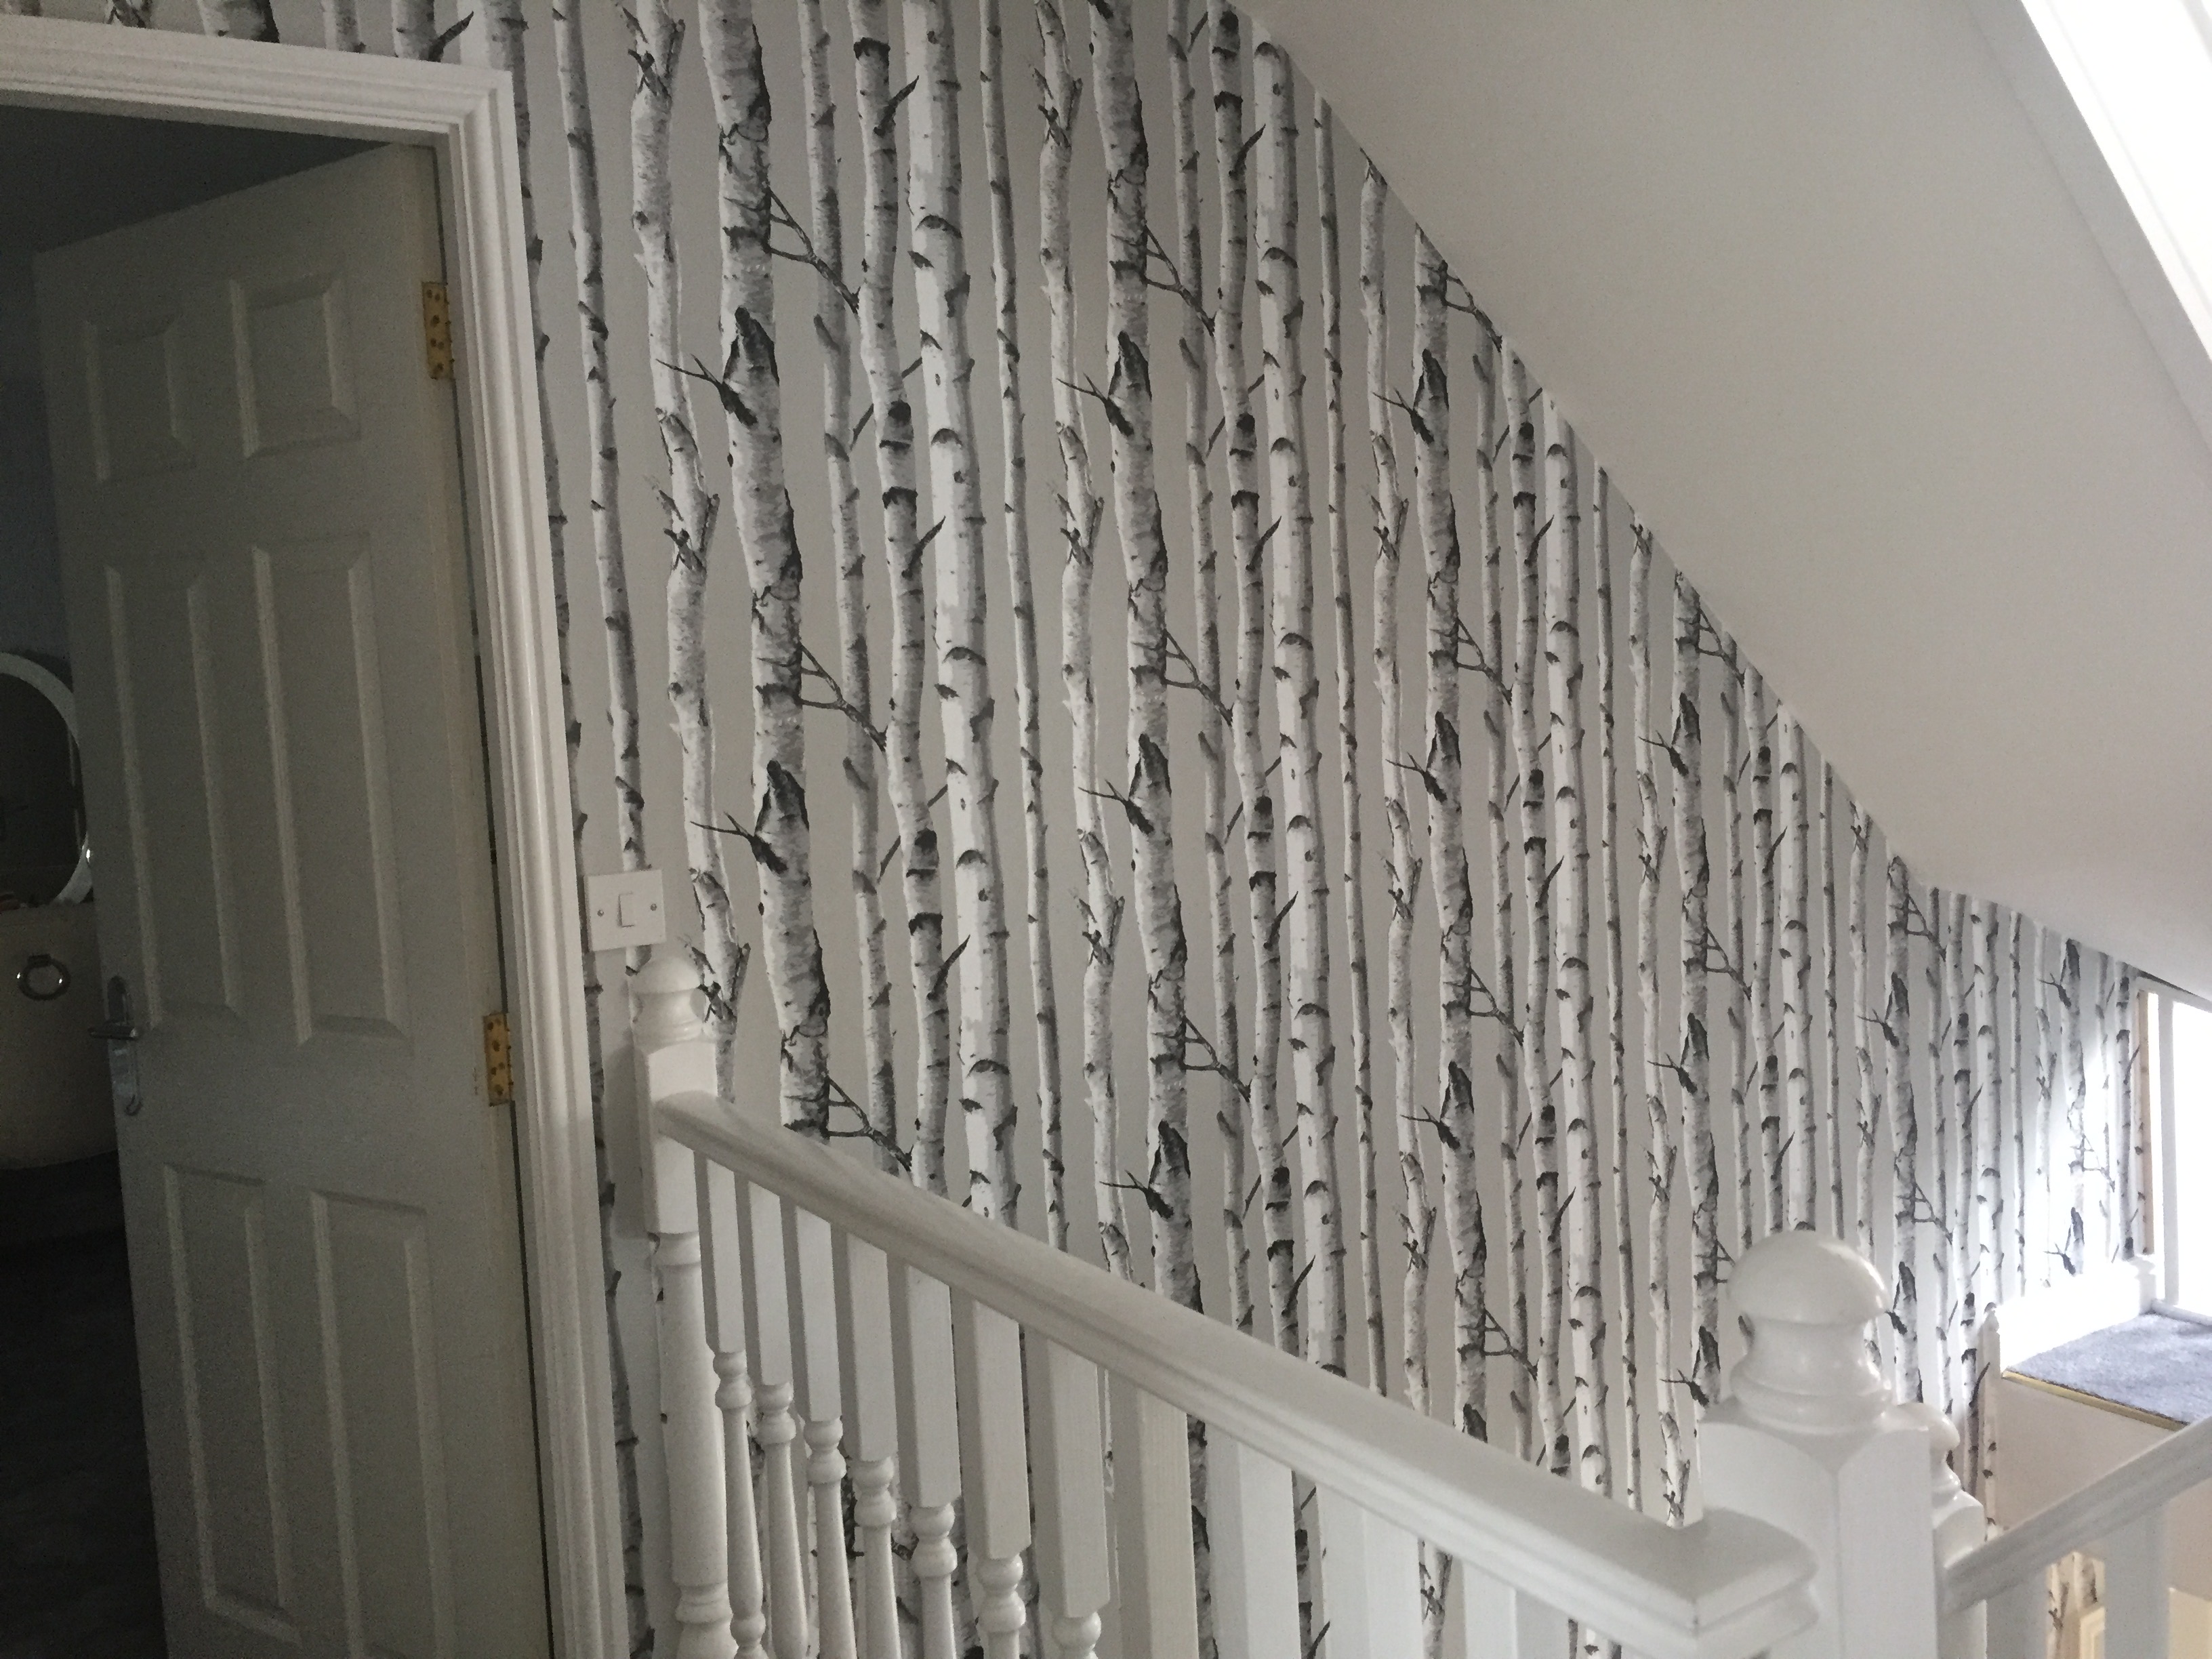 Self adhesive wallpaper to stairs and landing